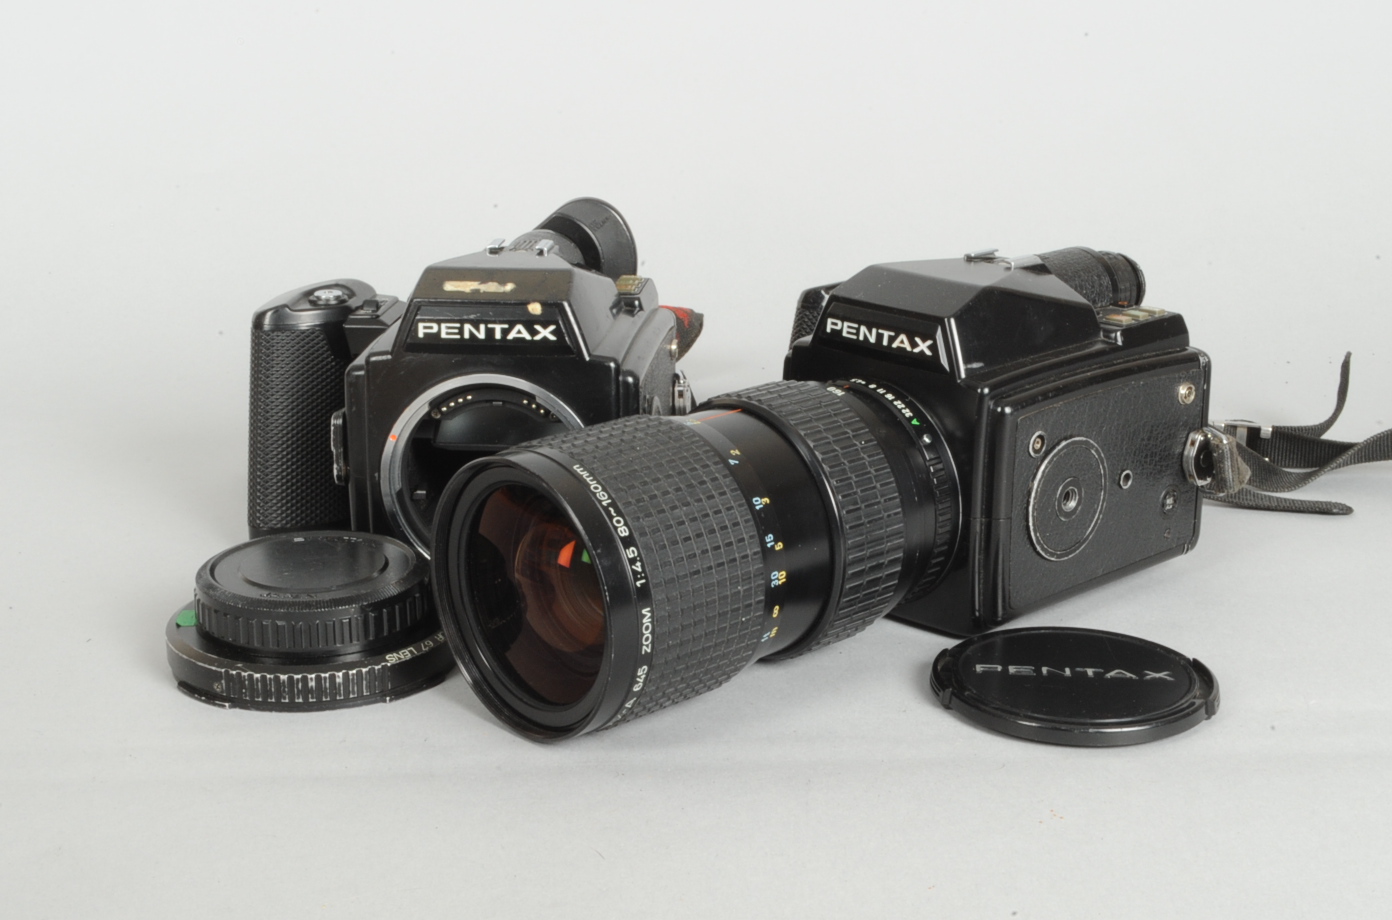 An Asahi Pentax 645 SLR Camera, shutter faulty (only B, 1/60 and 1/2000s possible), a Pentax-A 645